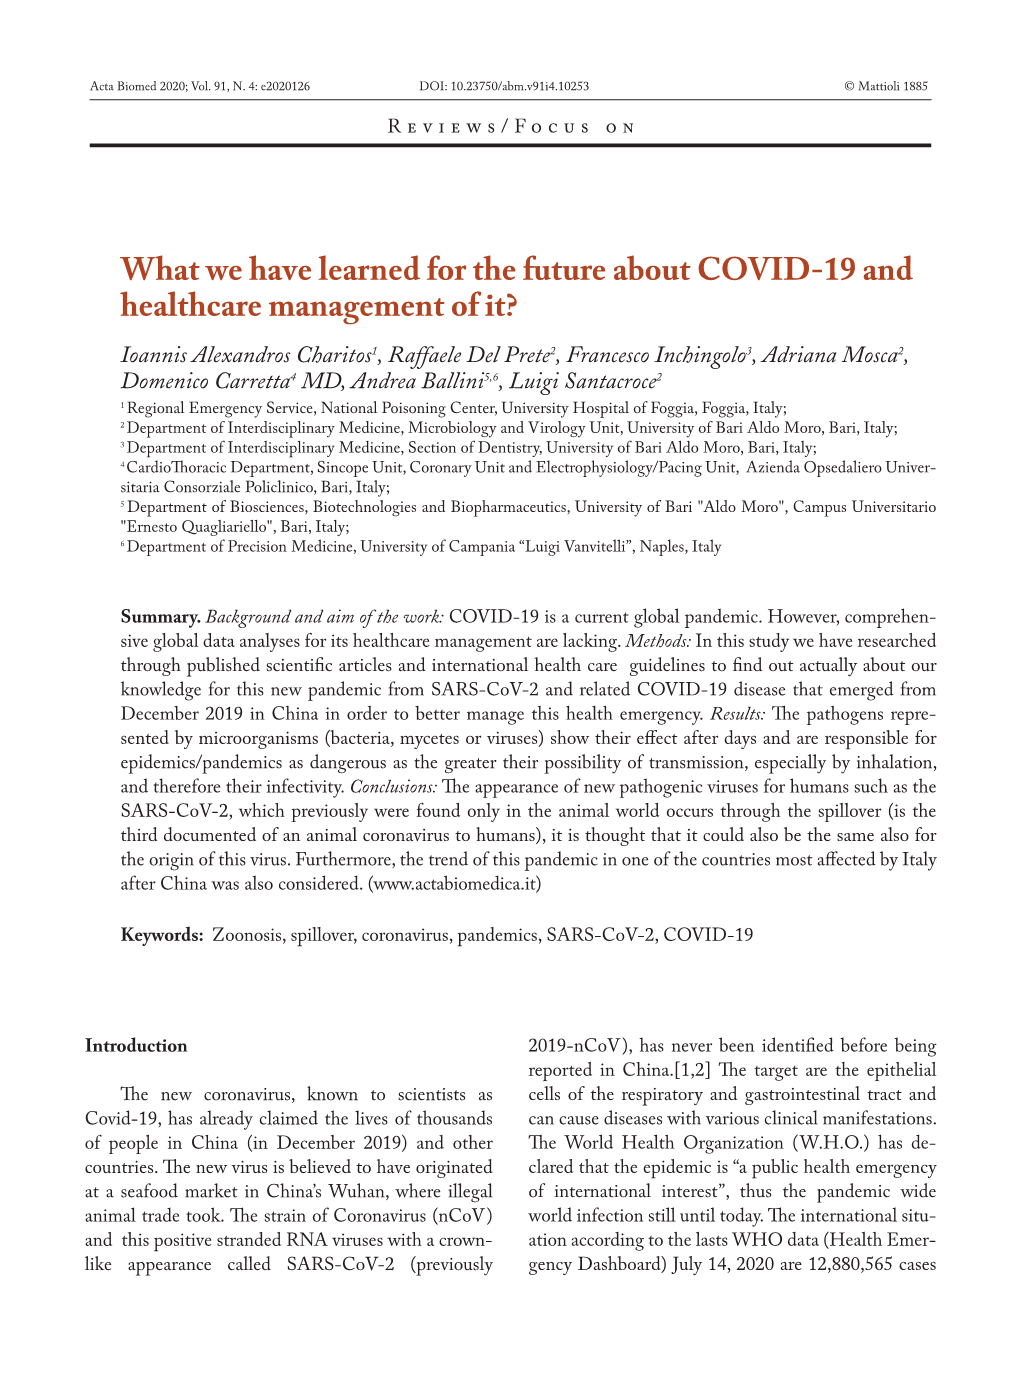 What We Have Learned for the Future About COVID-19 and Healthcare